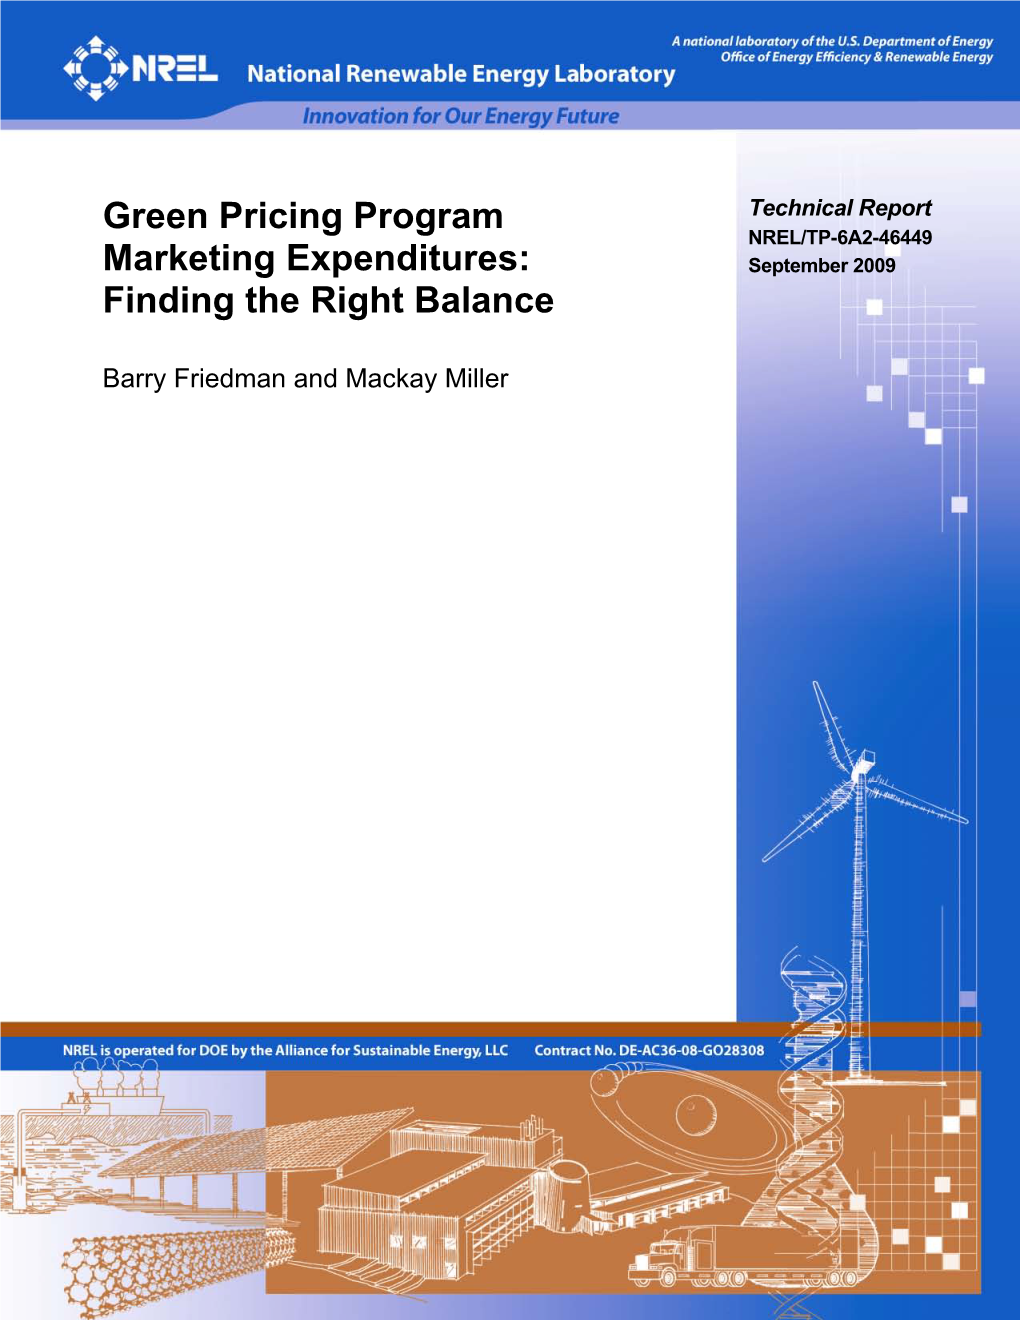 Green Pricing Program Marketing Expenditures: Finding the Right DE-AC36-08-GO28308 Balance 5B